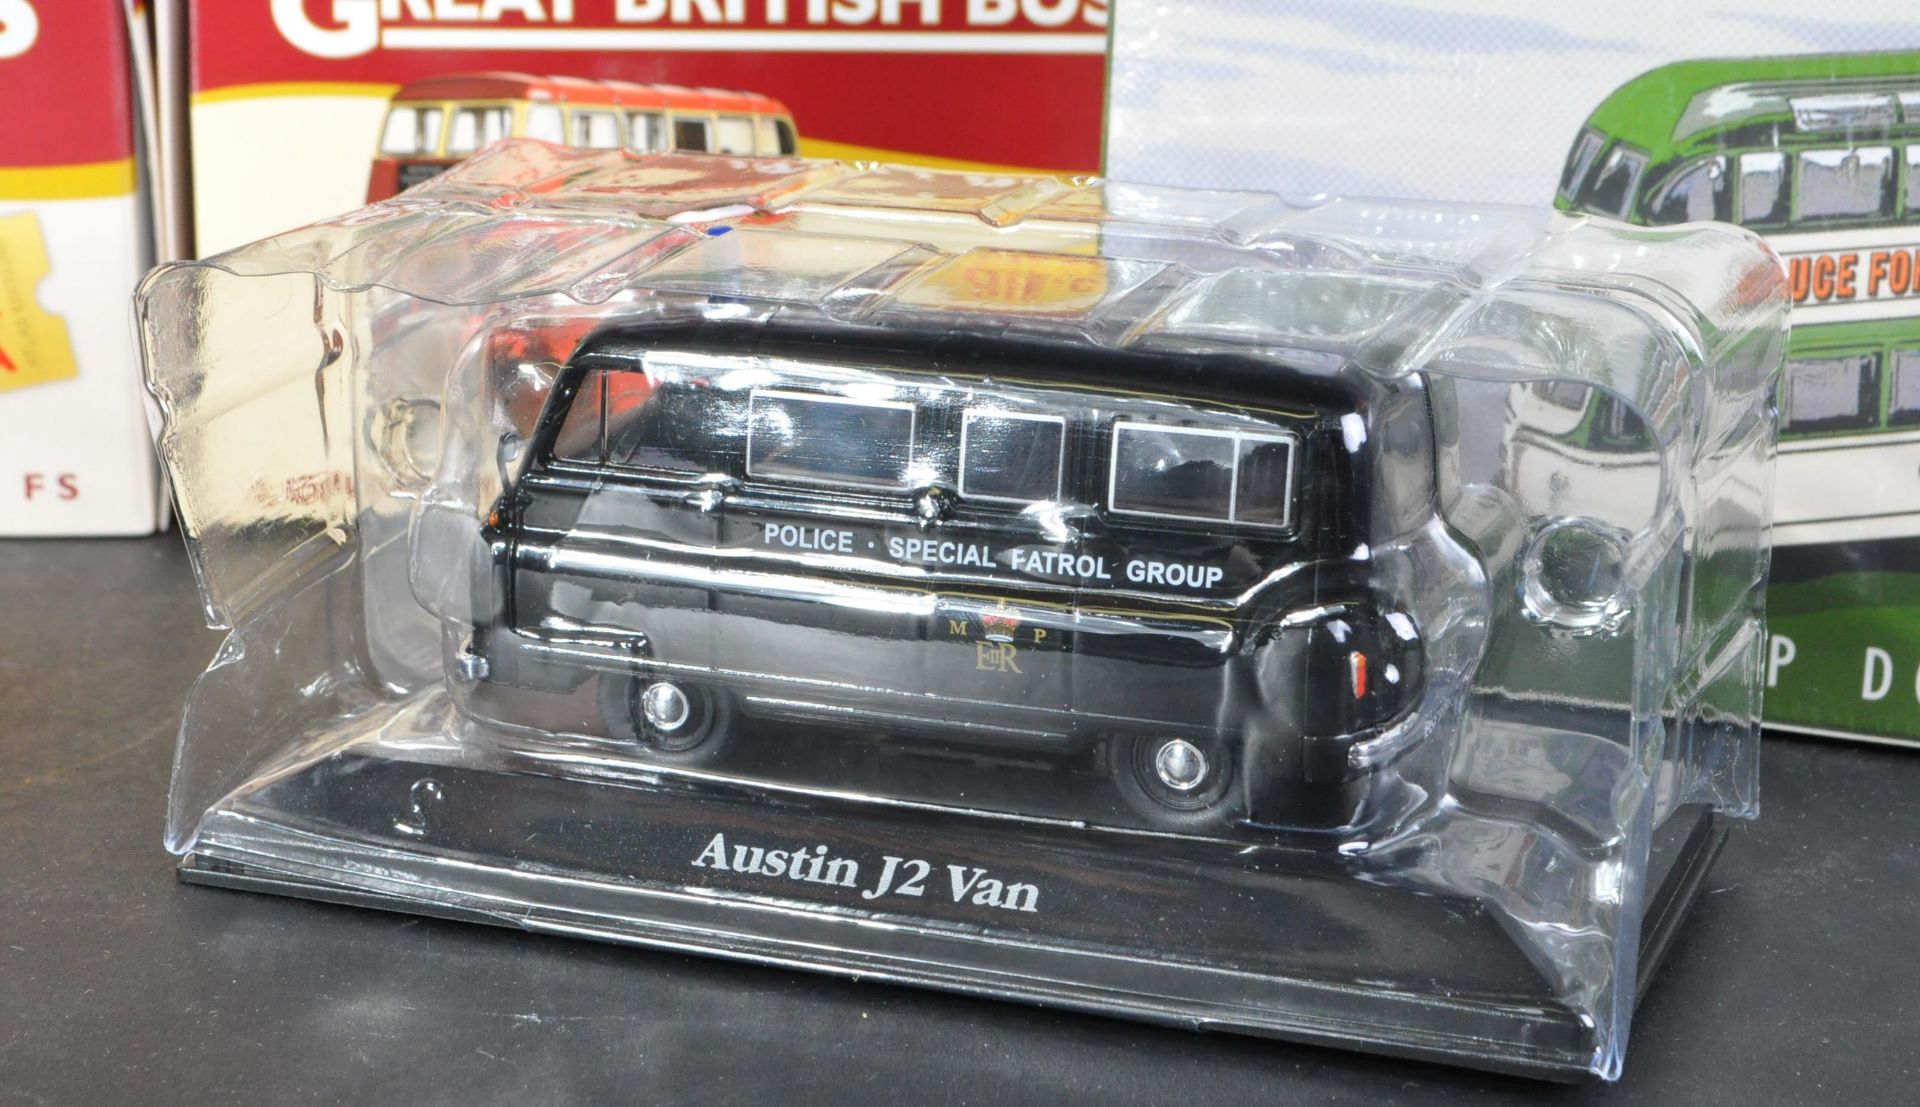 COLLECTION OF ATLAS EDITIONS DIECAST MODELS - Image 4 of 6